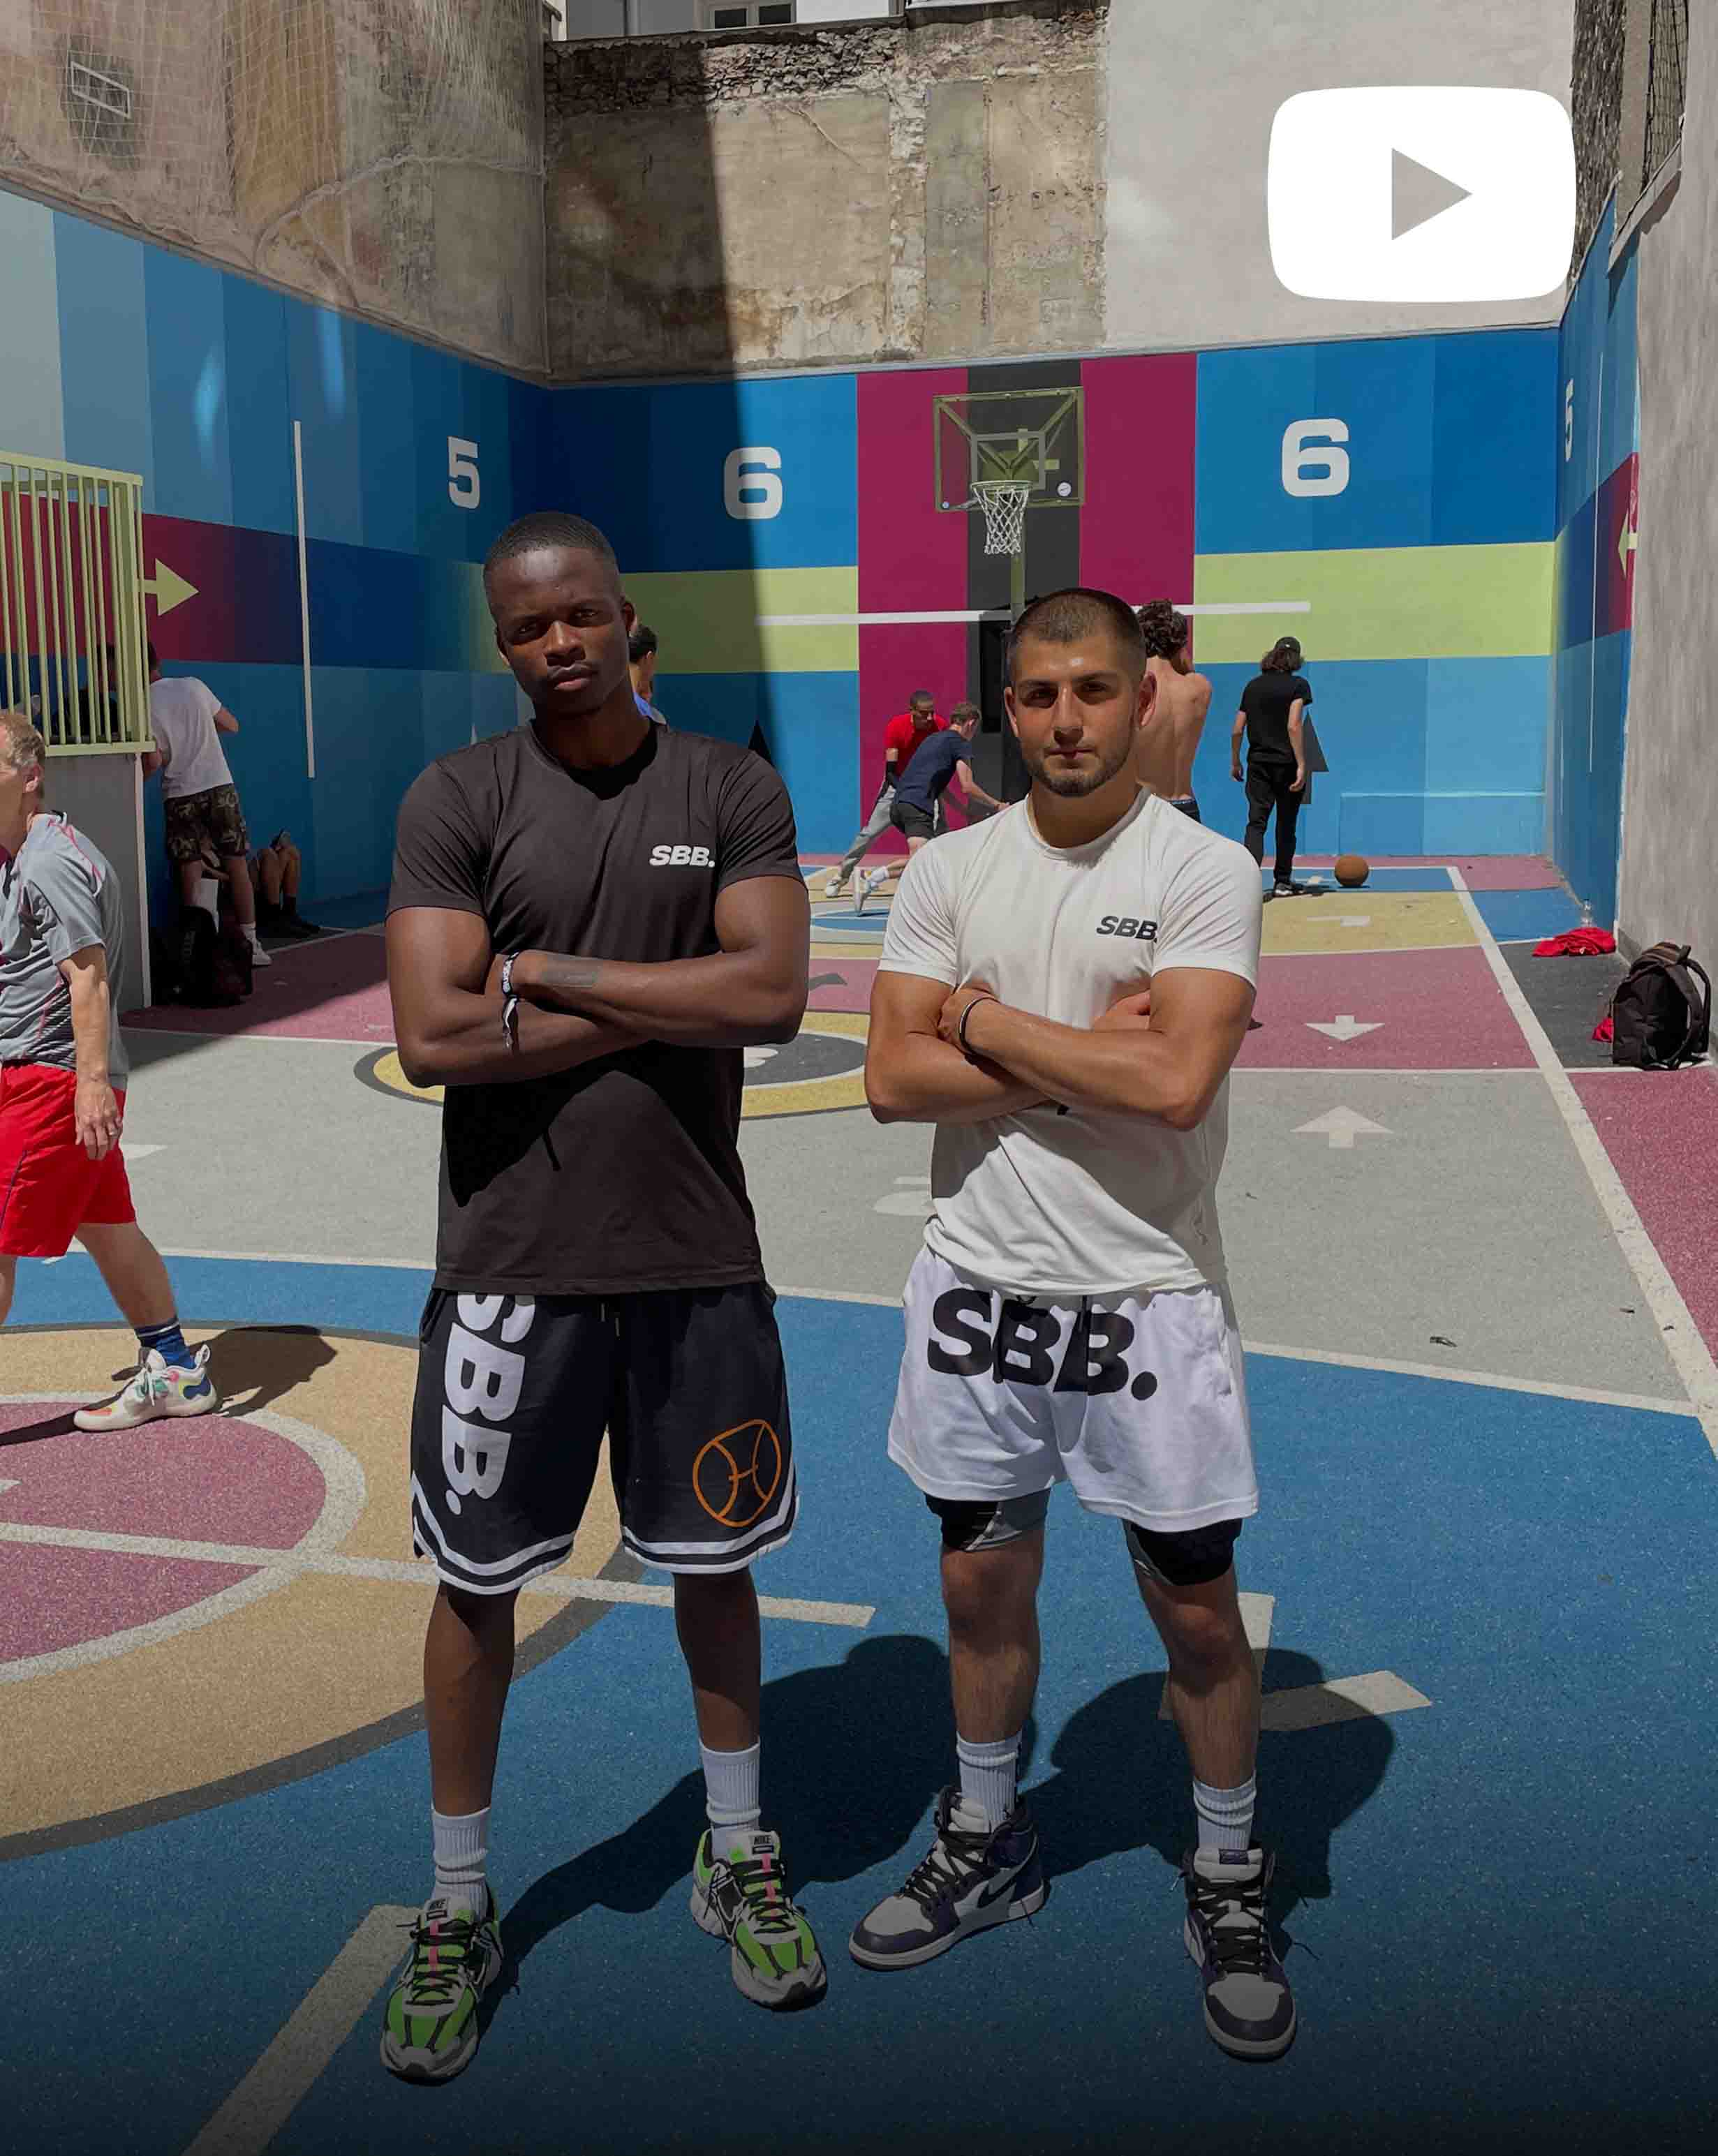 Behrad and Denzel from Simply British Ballers (SBB) stand at Pigalle basketball court in Paris, wearing an SBB t-shirt, SBB shorts and SBB socks